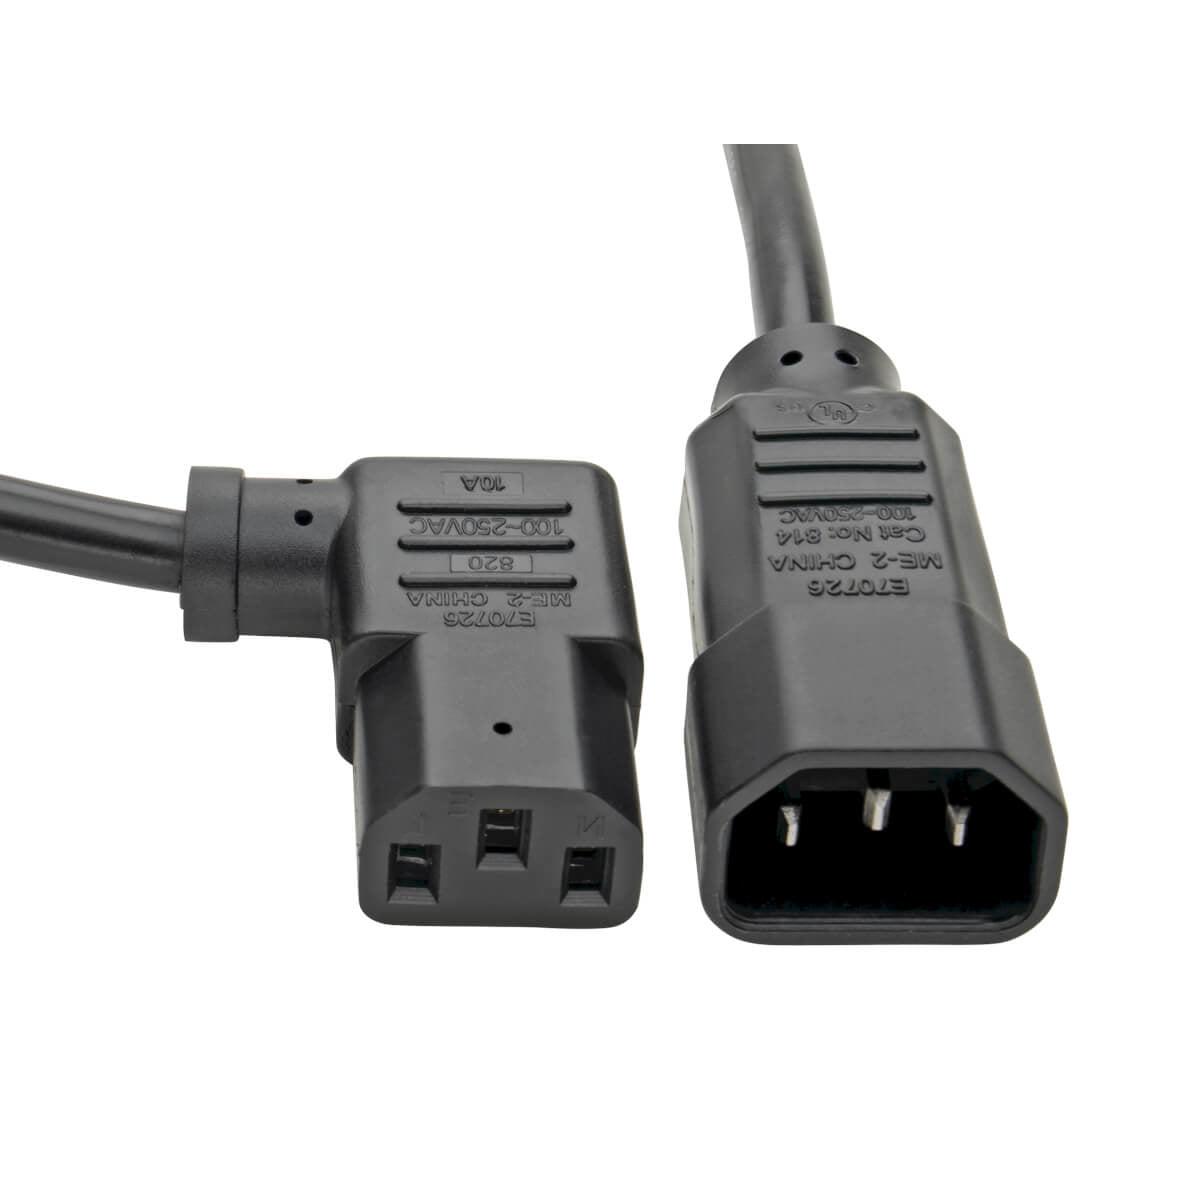 Tripp Lite P004-002-13Ra Power Extension Cord, Right-Angle C13 To C14 Pdu Style - 10A, 250V, 18 Awg, 2 Ft. (0.61 M), Black